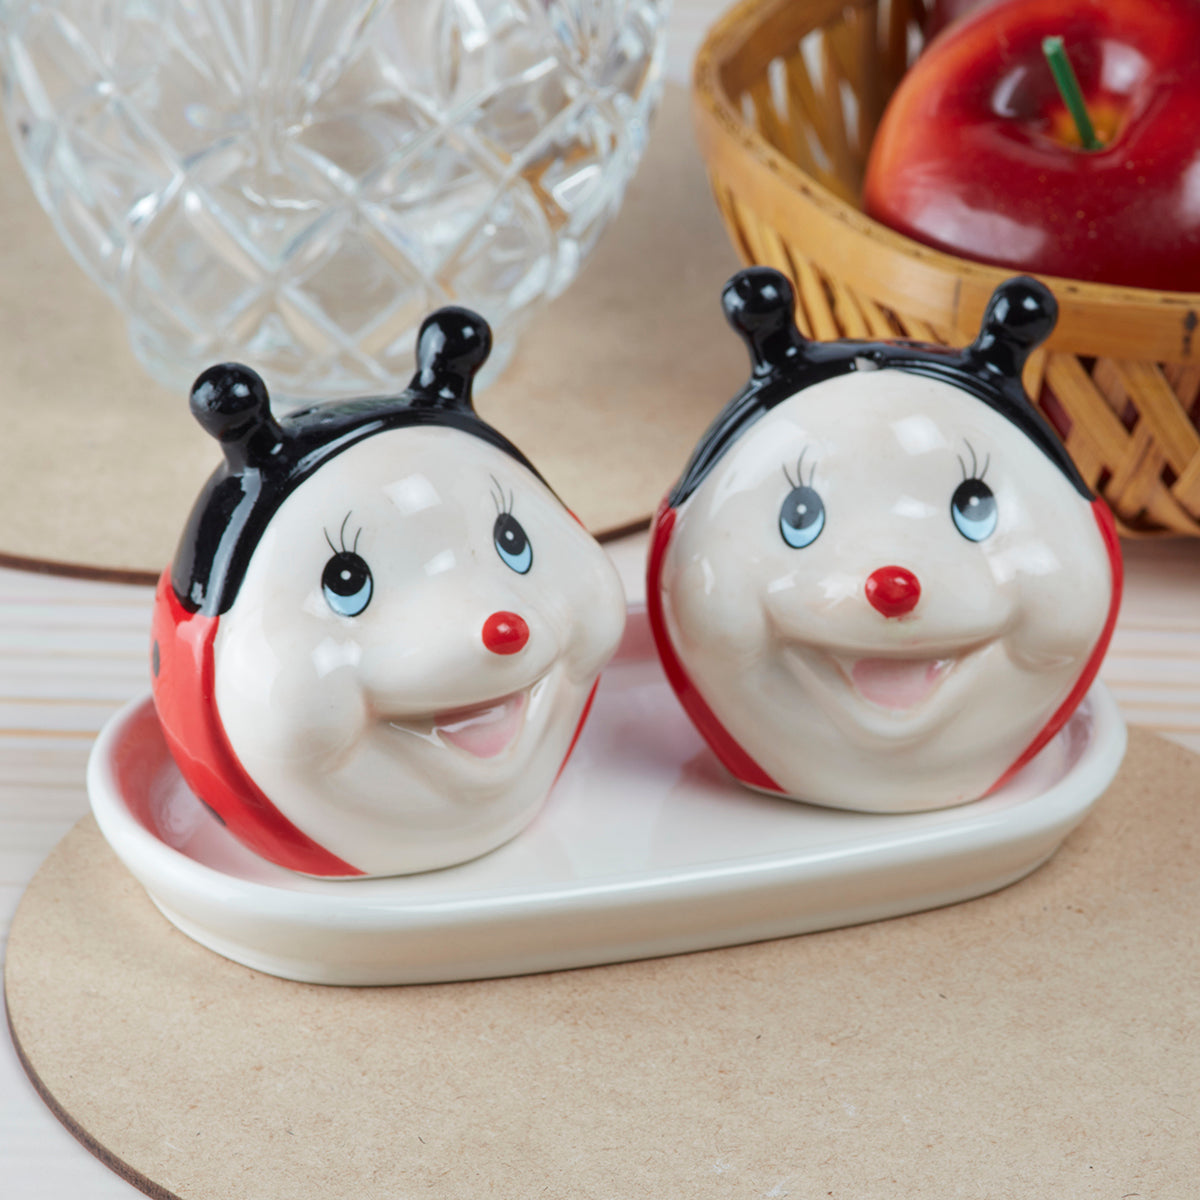 Ceramic Salt and Pepper Shakers Set with tray for Dining Table (10658)